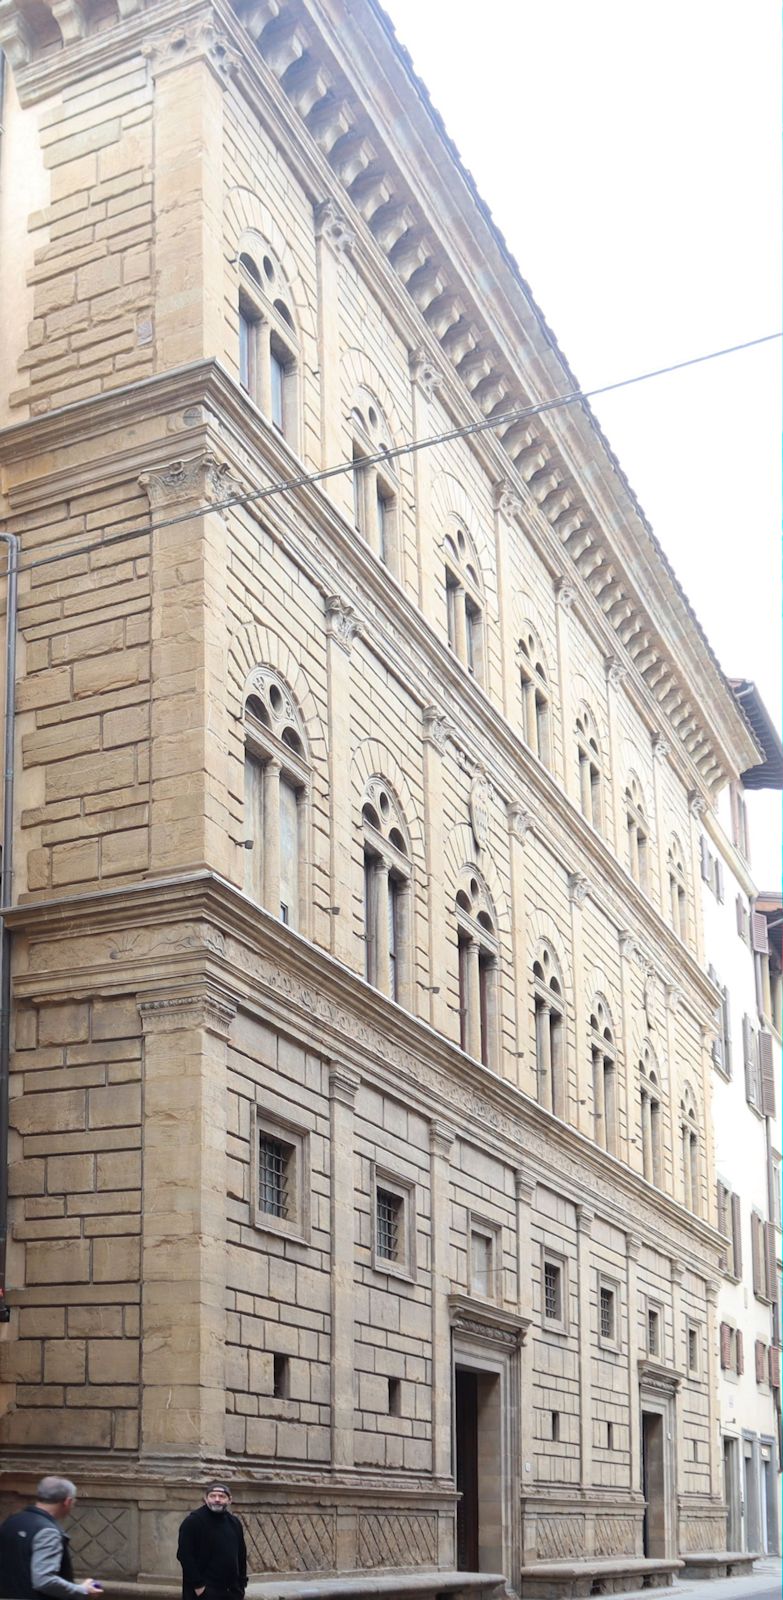 Palazzo Rucellai in Florenz